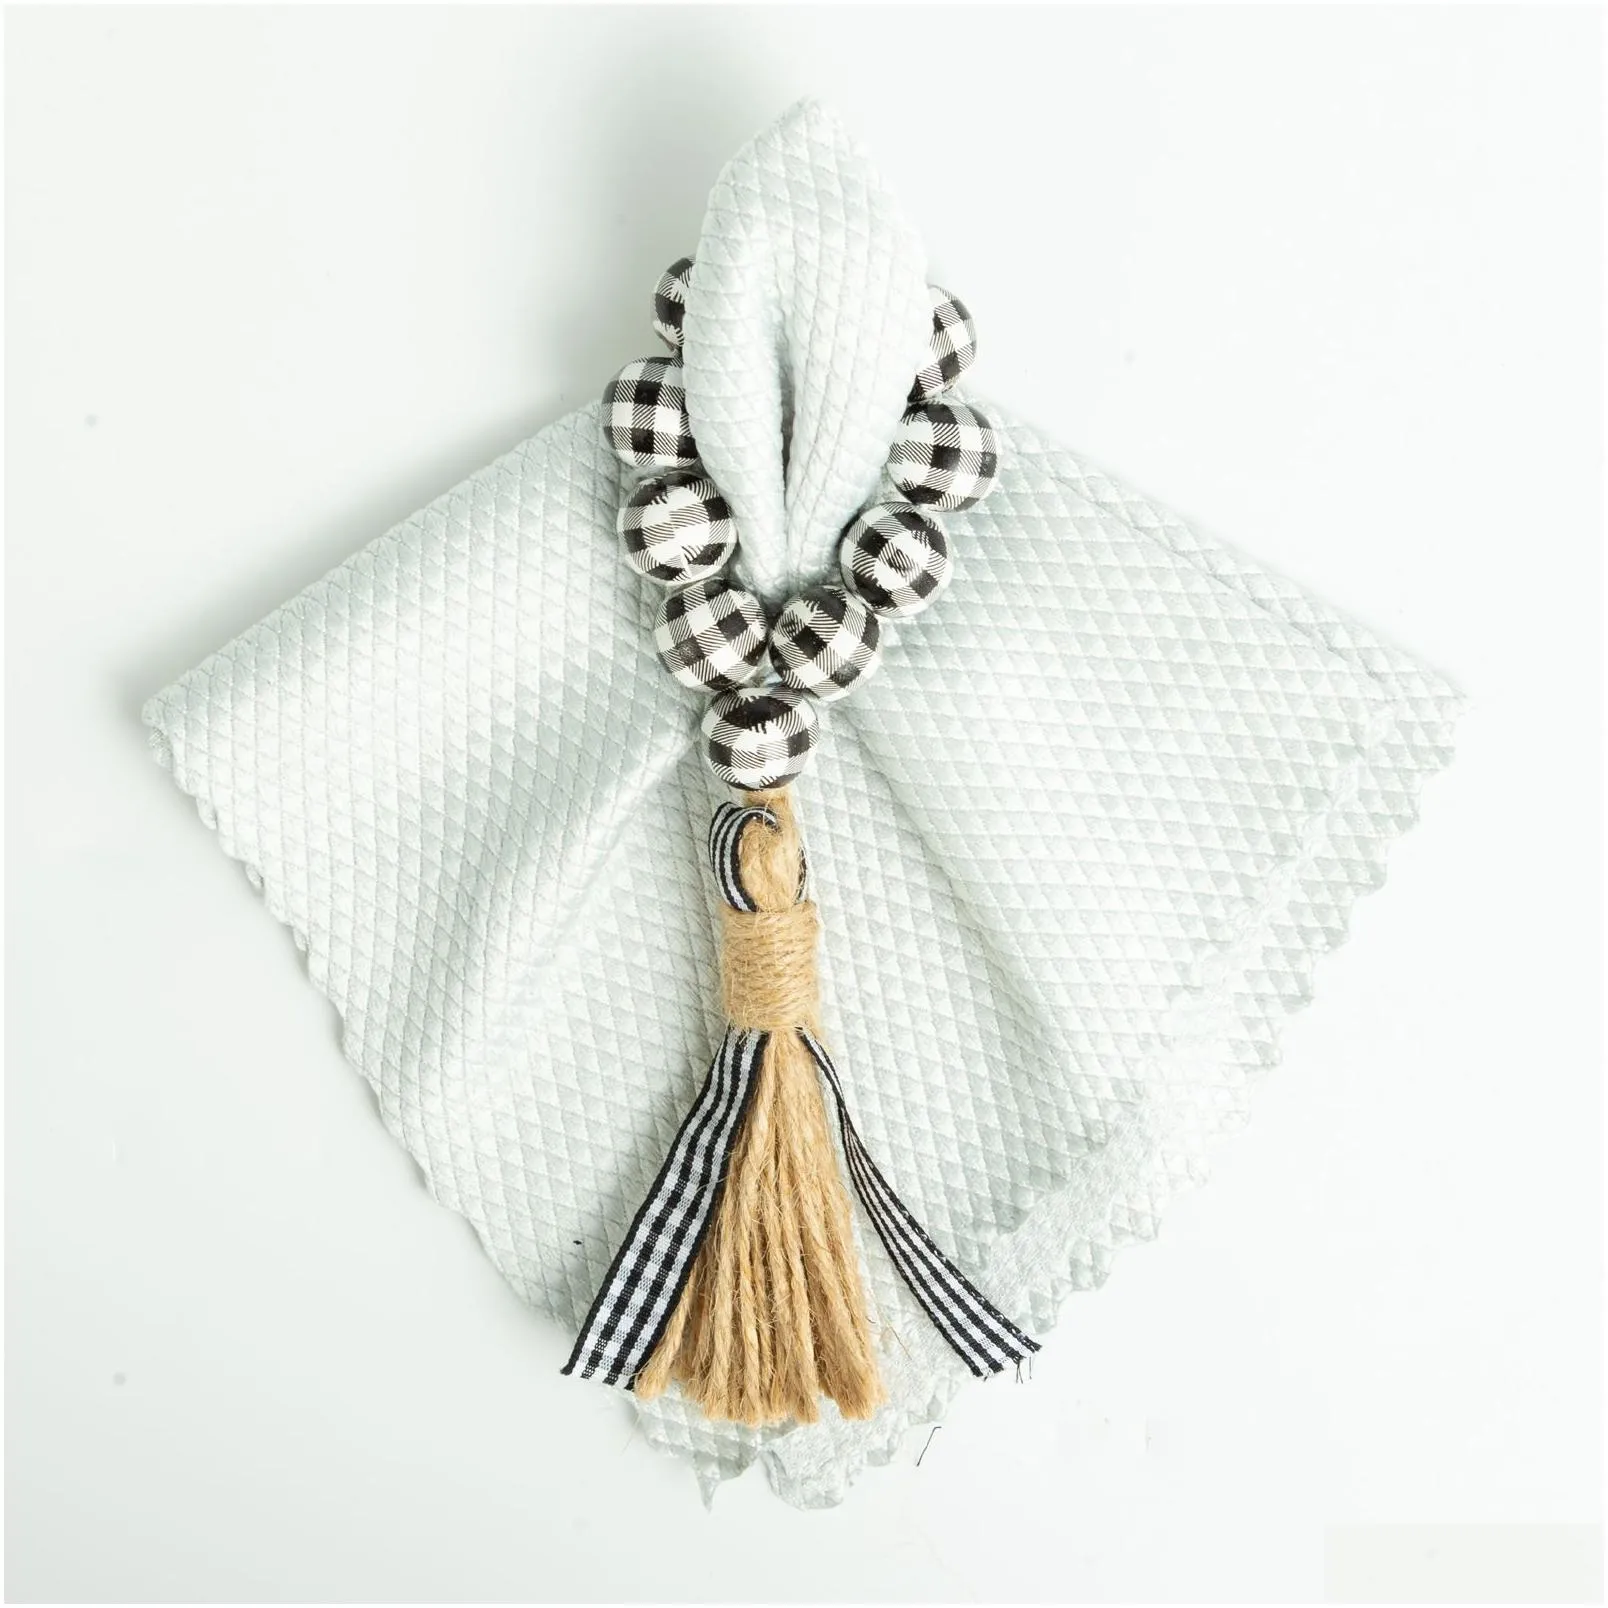 natural wooden beads napkin rings with tassels wedding dinner table decorations pastoral style plaid bead tassel napkin buckles bh8148